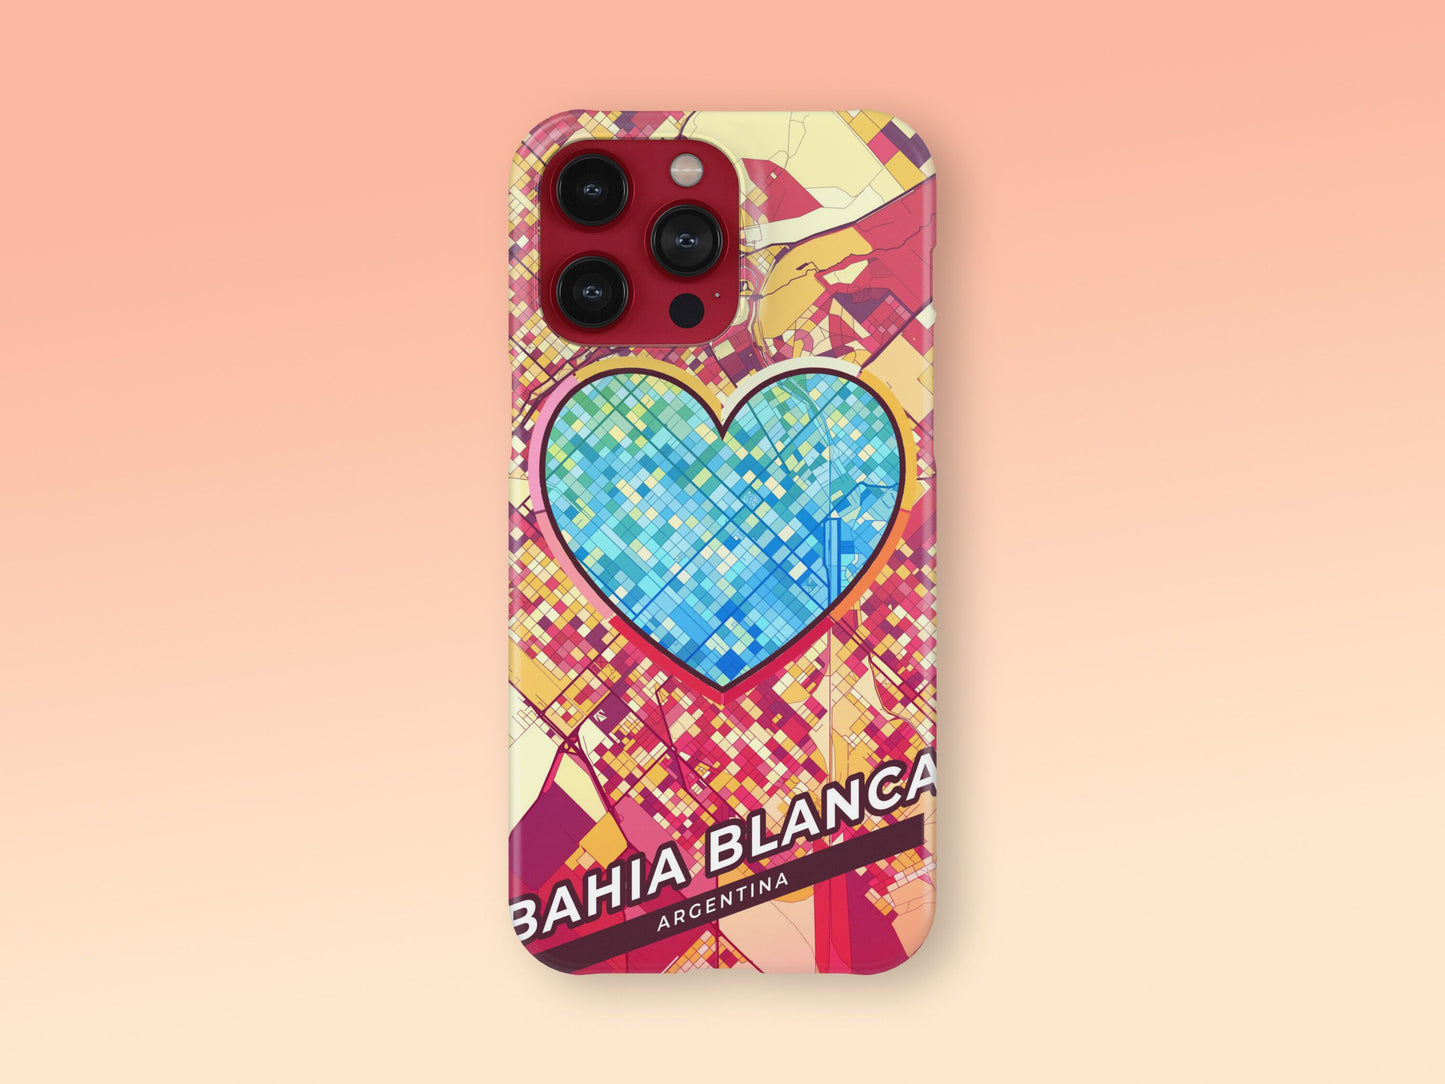 Bahia Blanca Argentina slim phone case with colorful icon. Birthday, wedding or housewarming gift. Couple match cases. 2